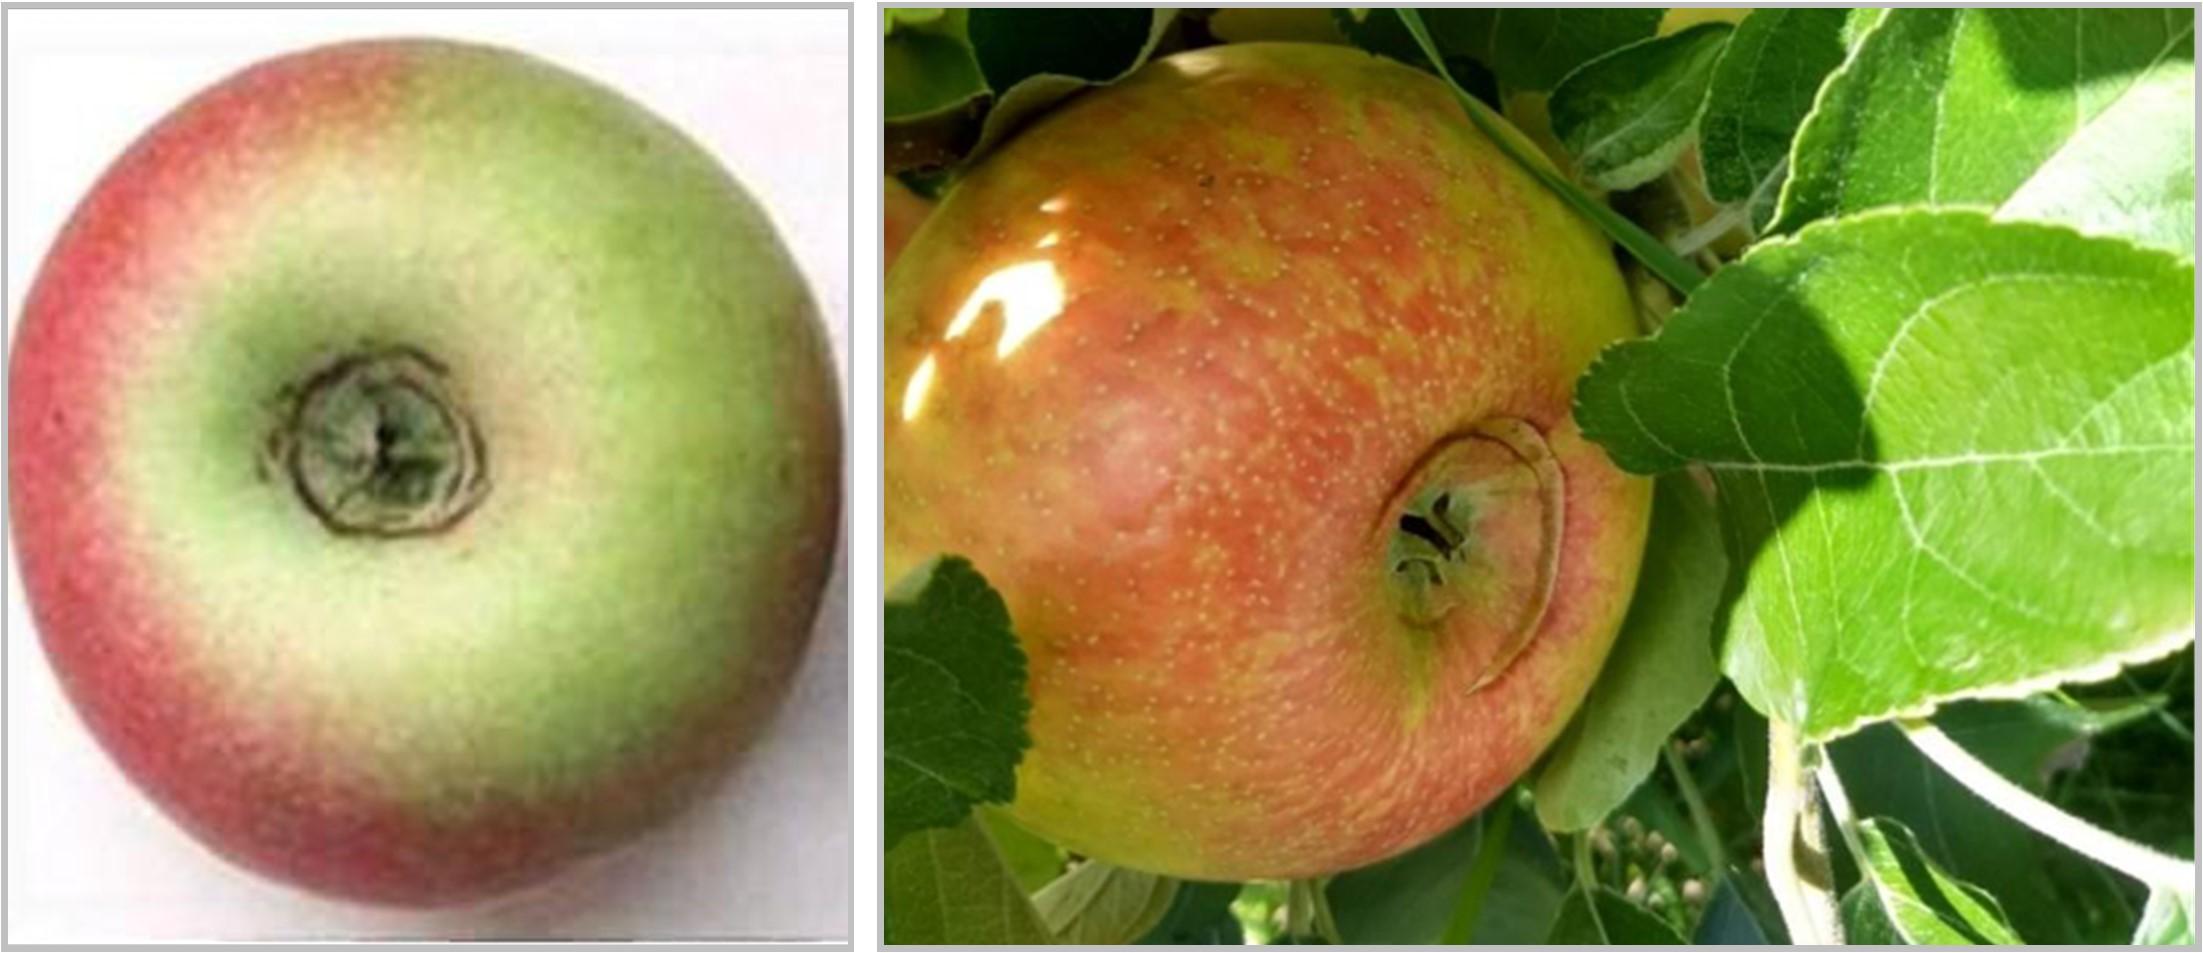 Calyx-end splitting in pink lady apple on left and honeycrisp on the right